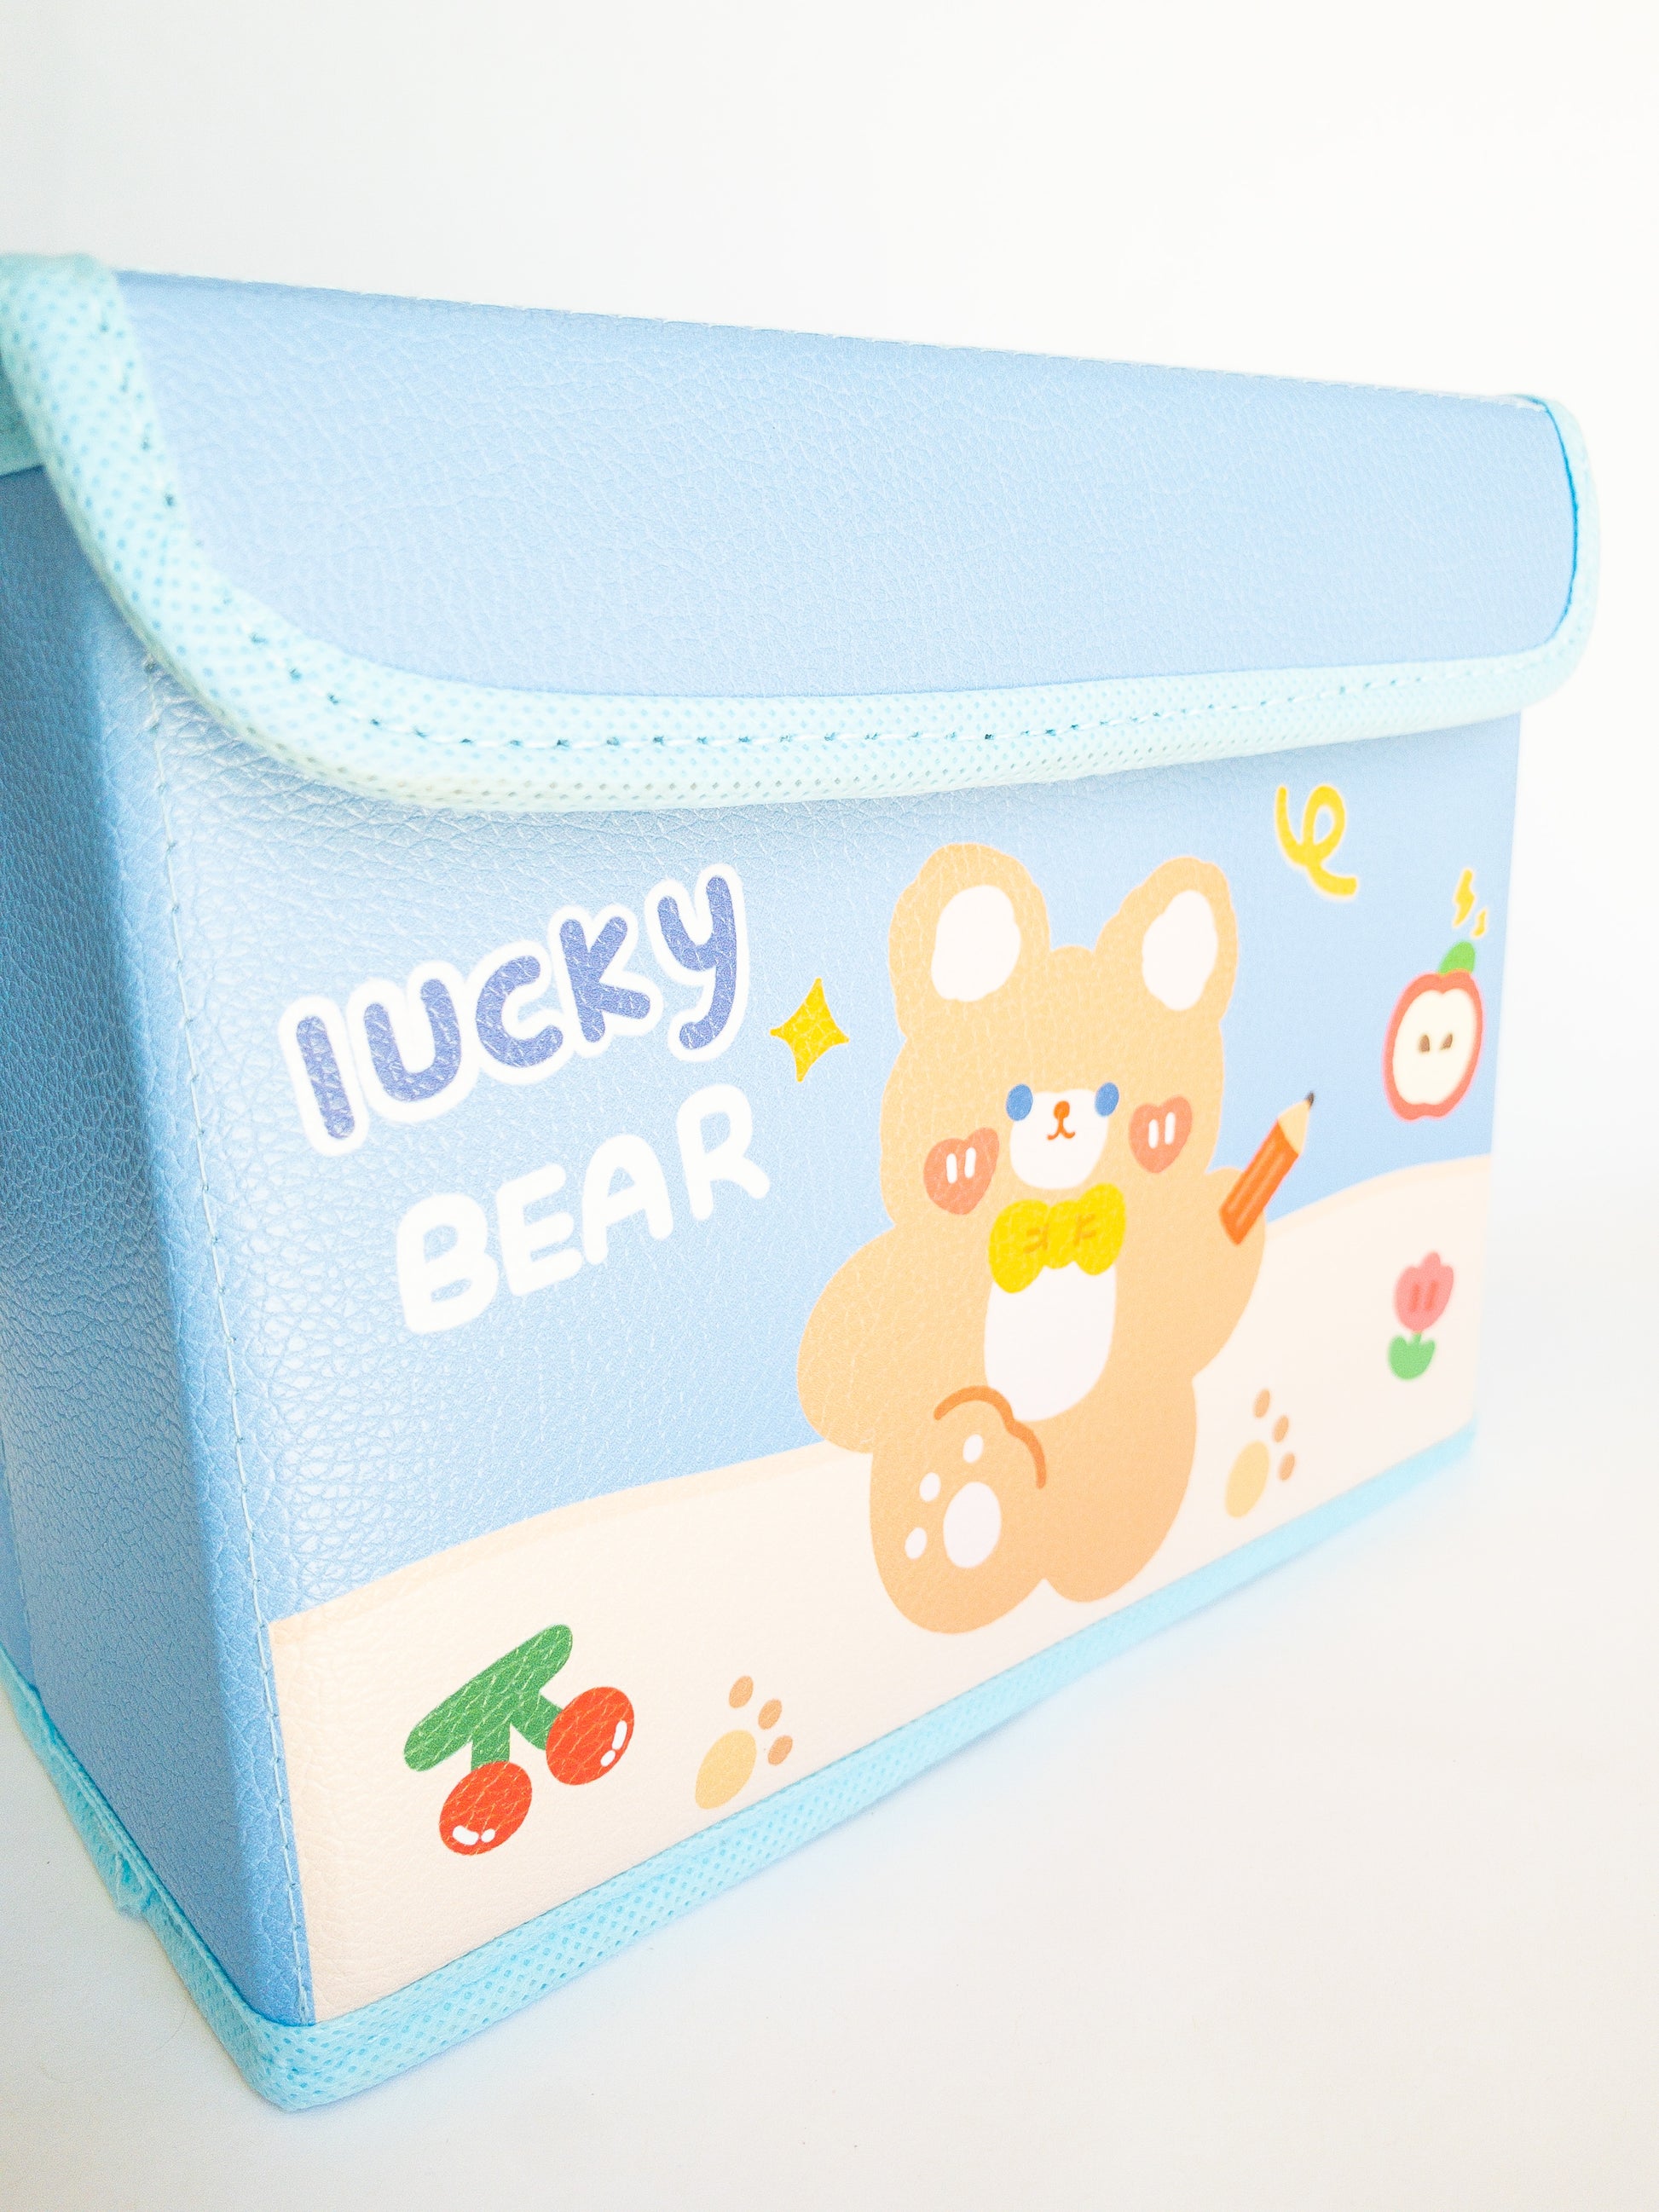 A multi-use, versatile storage box and the perfect place to throw all your Eggy Cakes hair clips in. The lid folds over and has a velcro close and it's large enough to hold pencils, markers, stickers, makeup, you name it. 